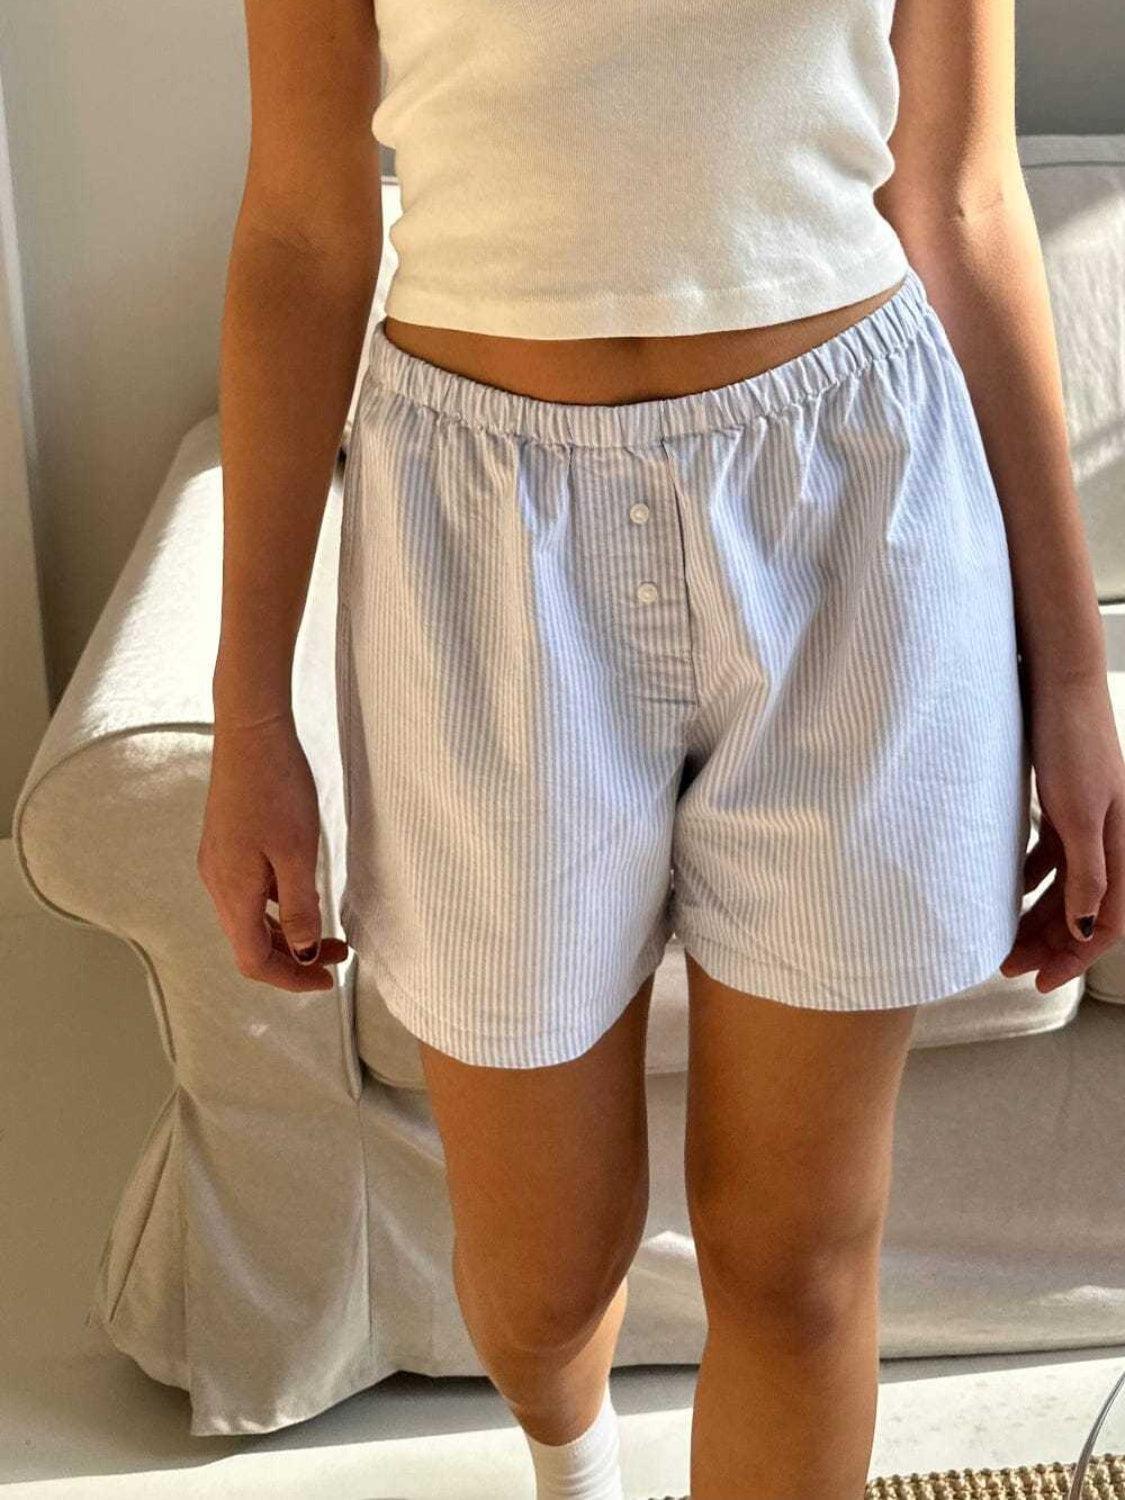 a woman in white shirt and shorts standing next to a bed